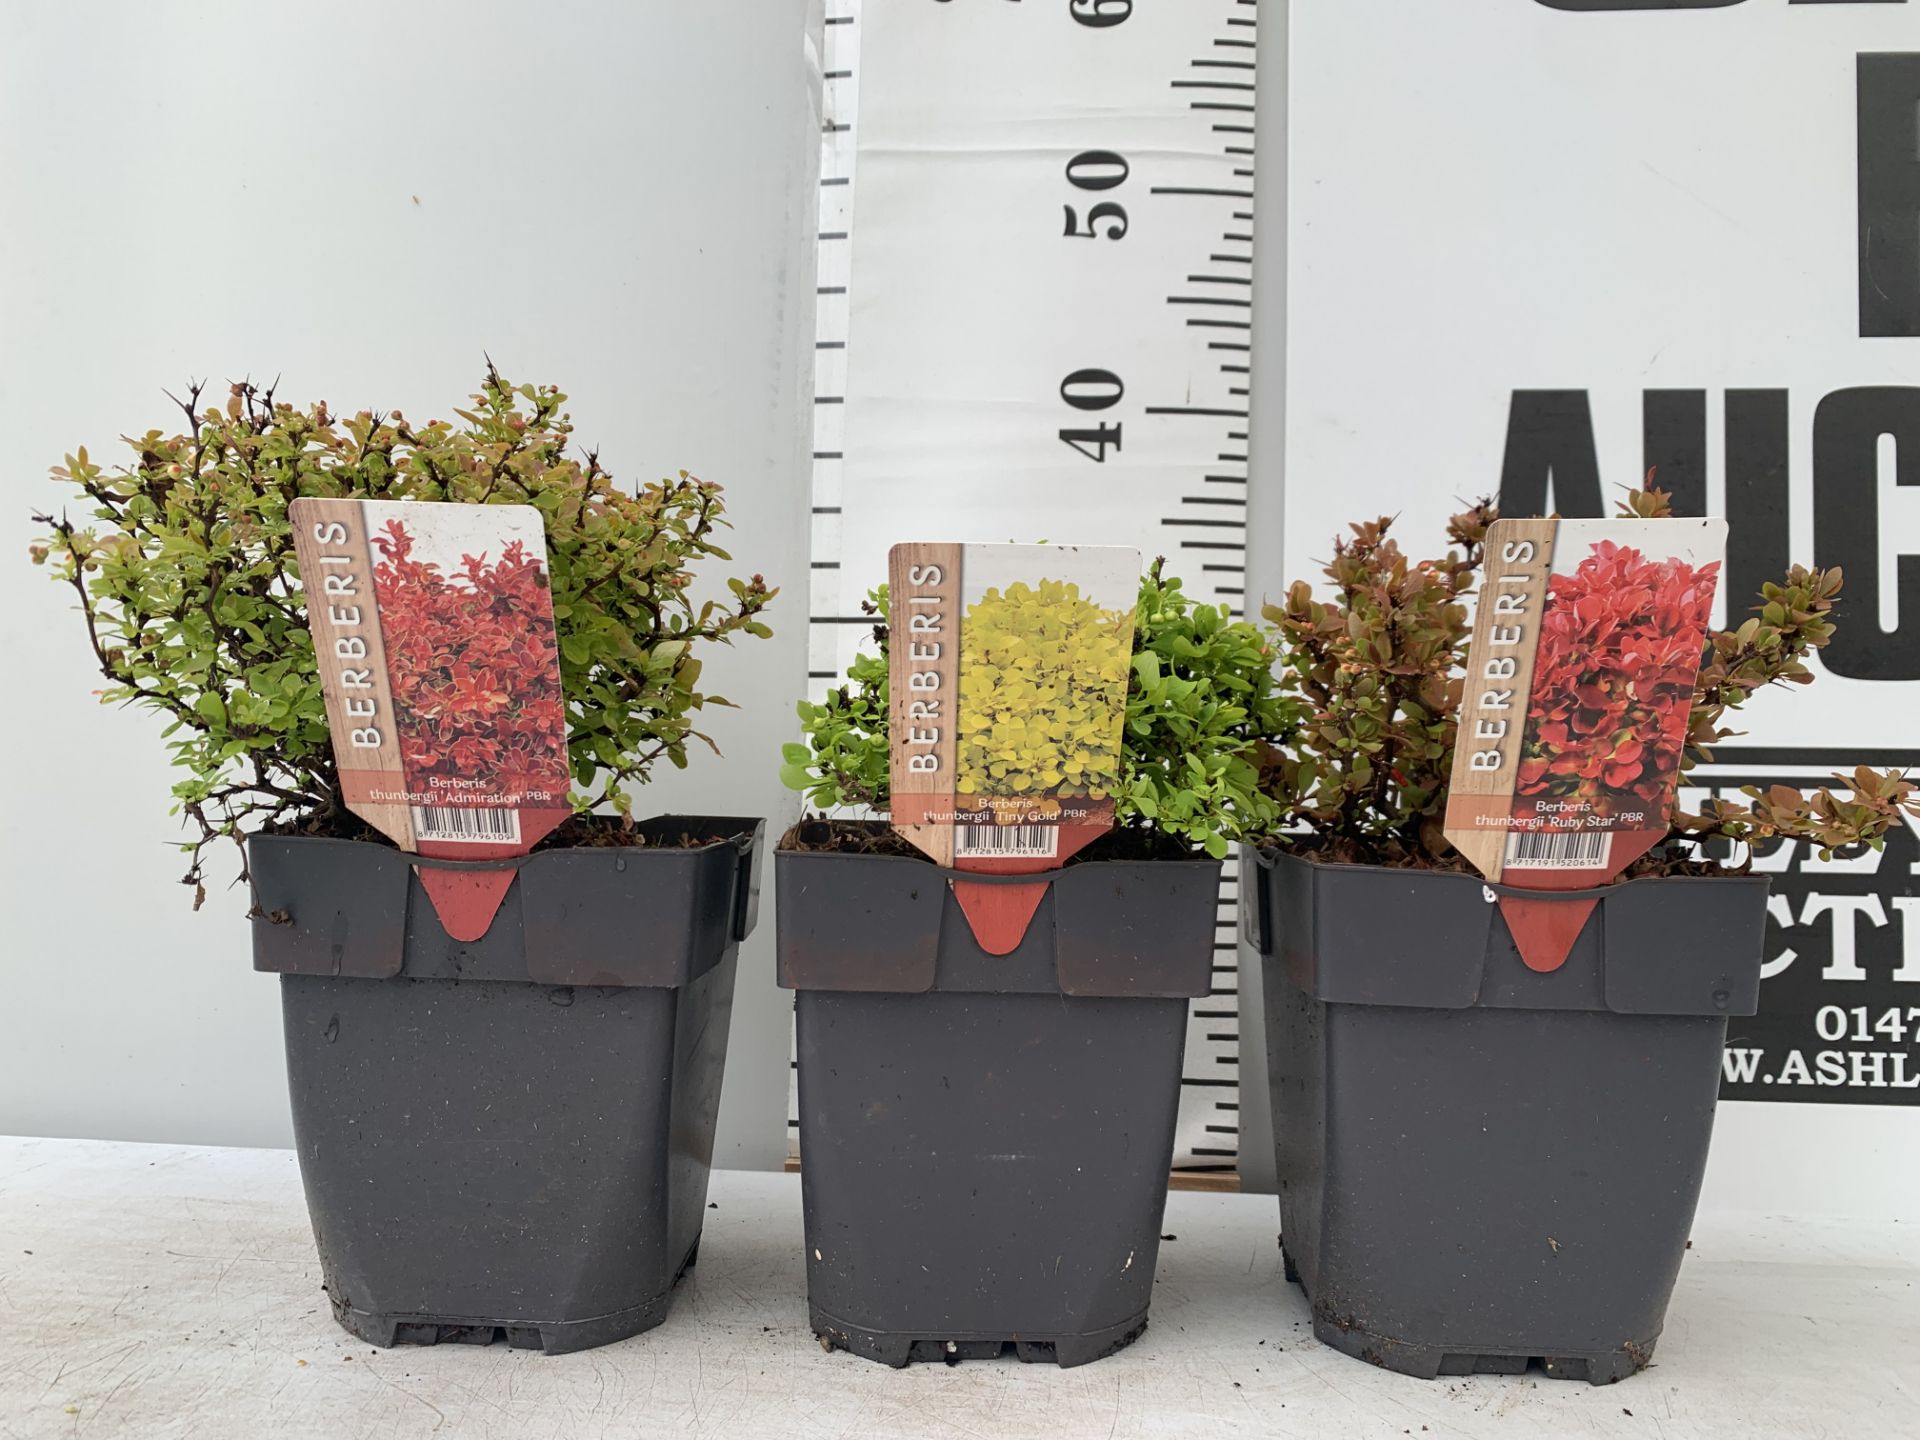 THREE ASSORTED BERBERIS THUNBERGII 'RUBY STAR' 'TINY GOLD' AND 'ADMIRATION' IN 2 LTR POTS PLUS VAT